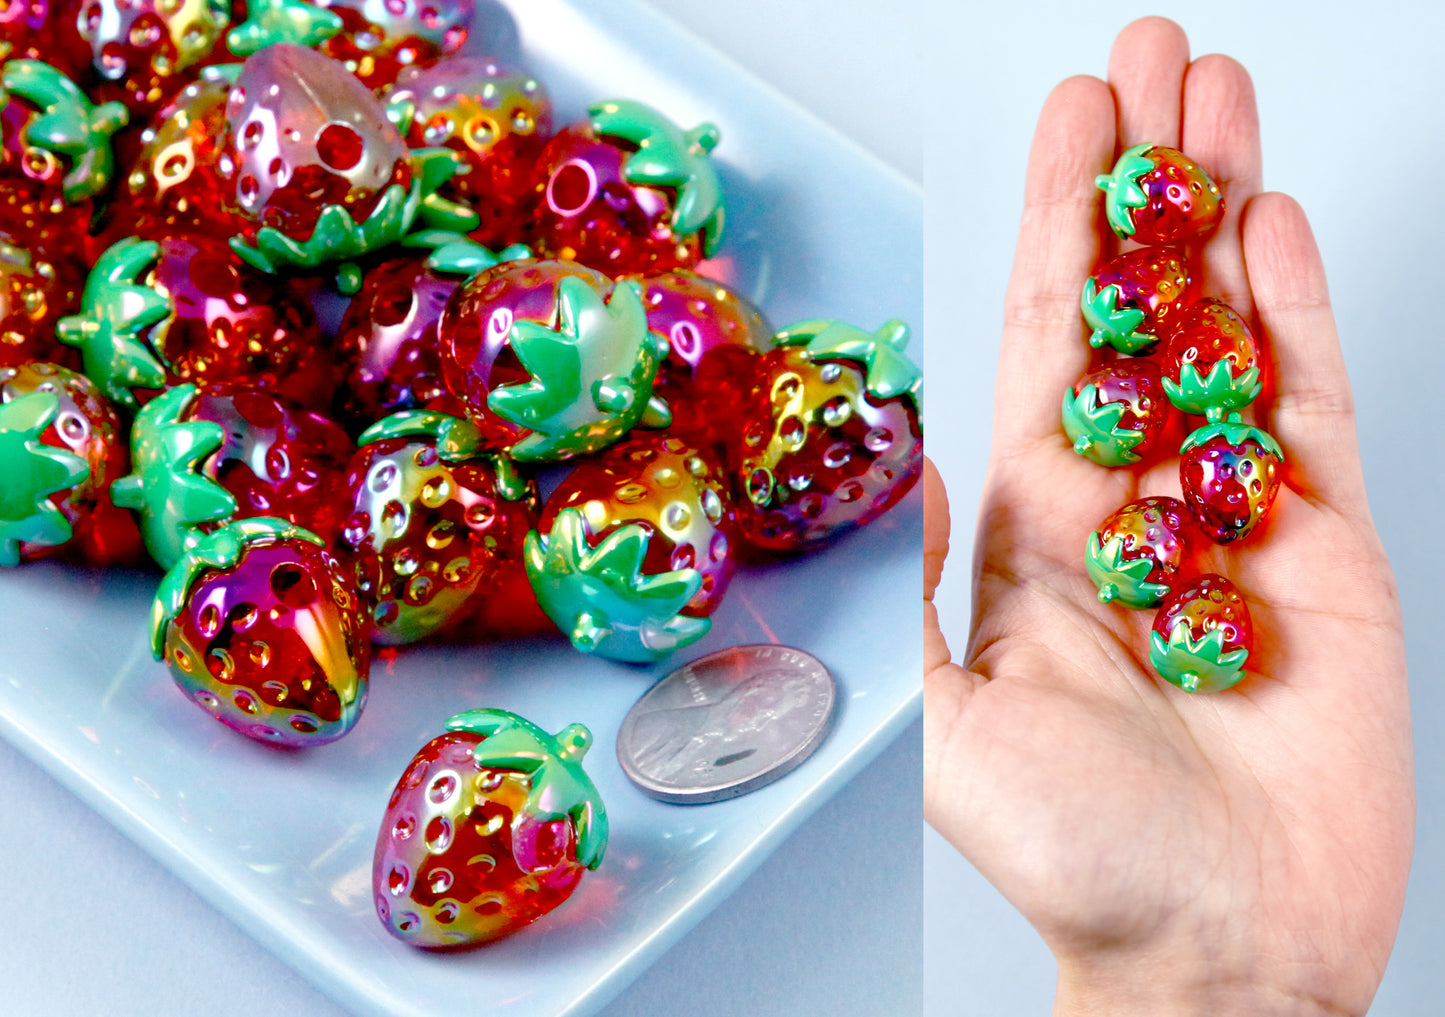 Strawberry Beads - 20mm AB Strawberry Big 3D Acrylic or Resin Beads - 10 pc set